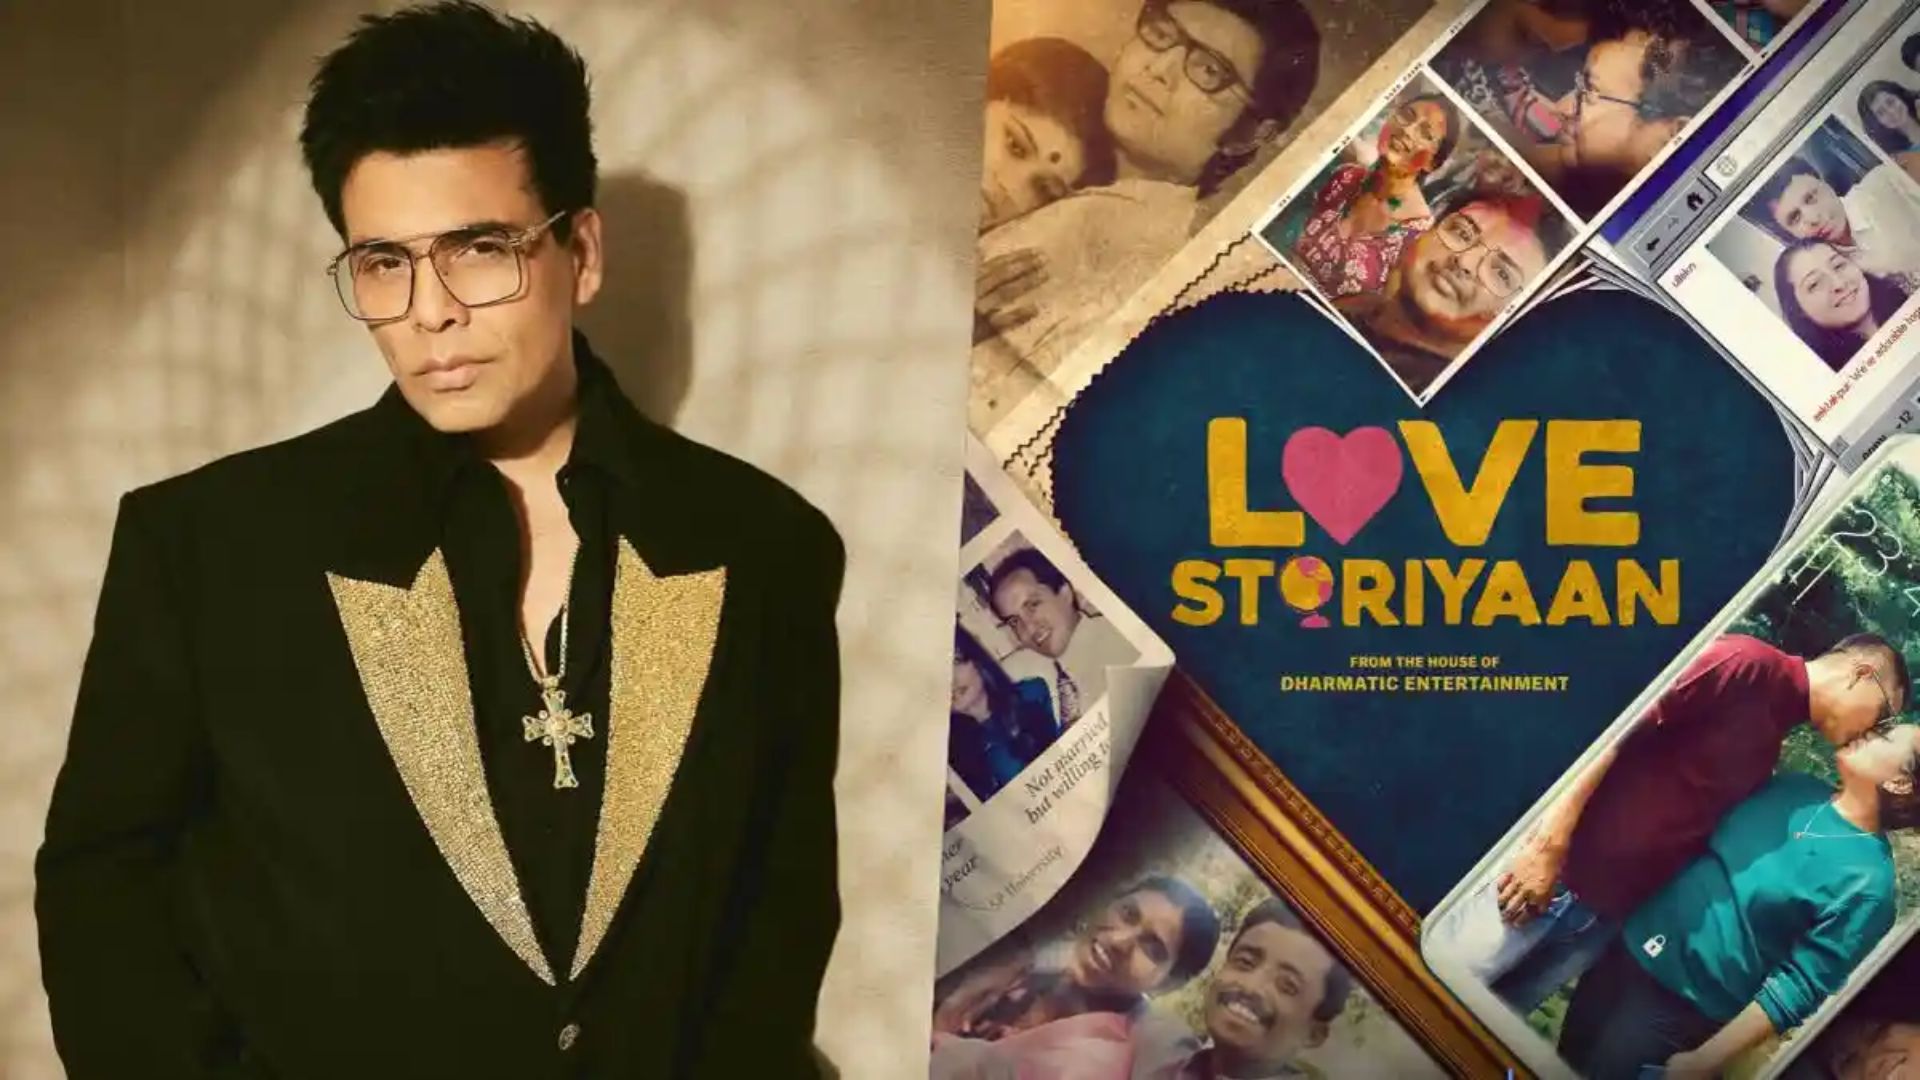 ‘Love Storiyaan’ based on real-life Indian love stories to be out on Valentine’s Day